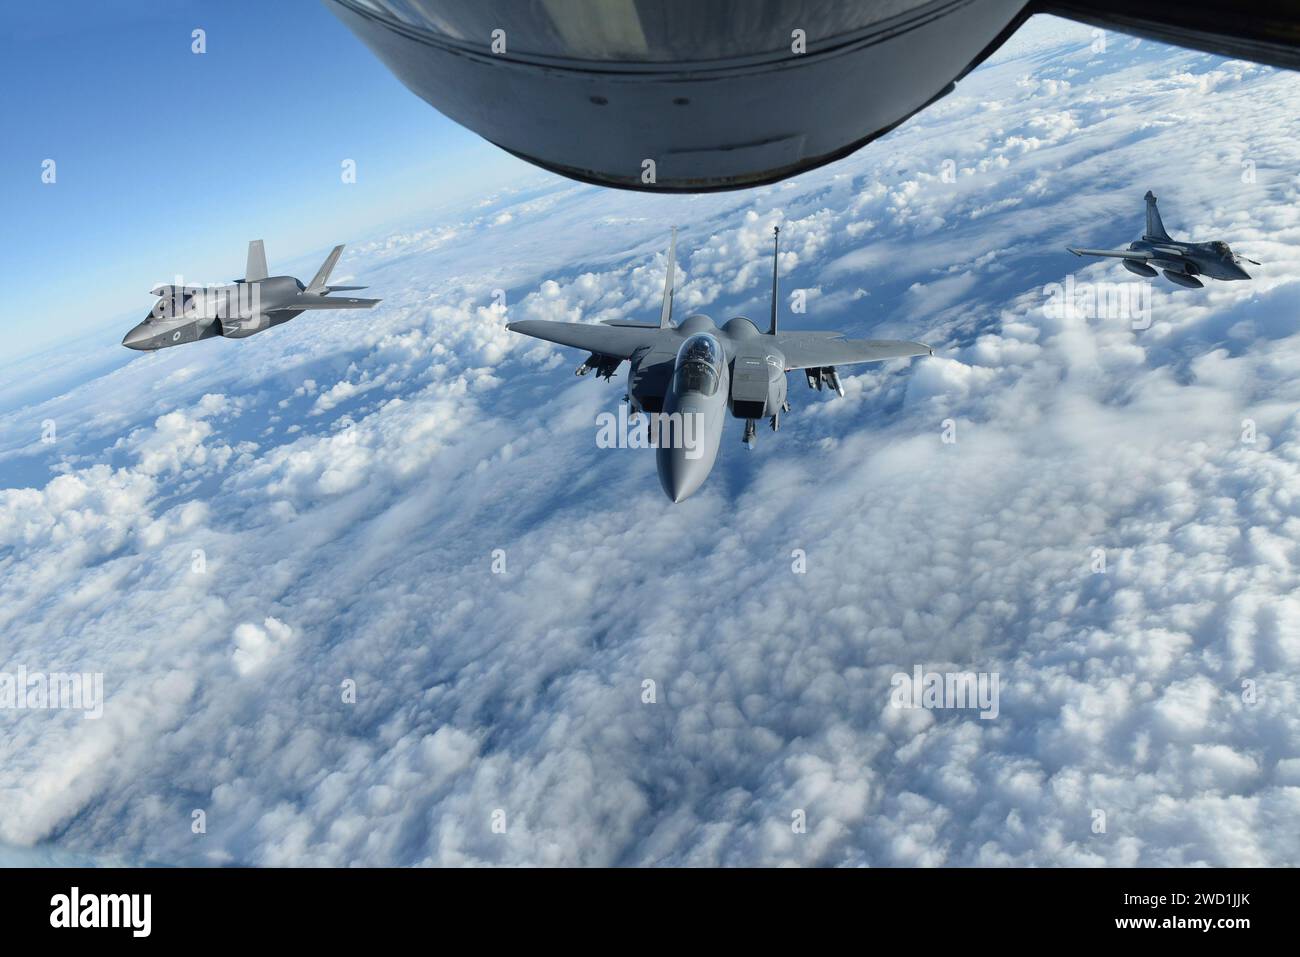 A Royal Air Force F-35 Lightning II, U.S. Air Force F-15E Strike Eagle and French Air Force Rafale fly behind a  KC-135 Stratotanker. Stock Photo